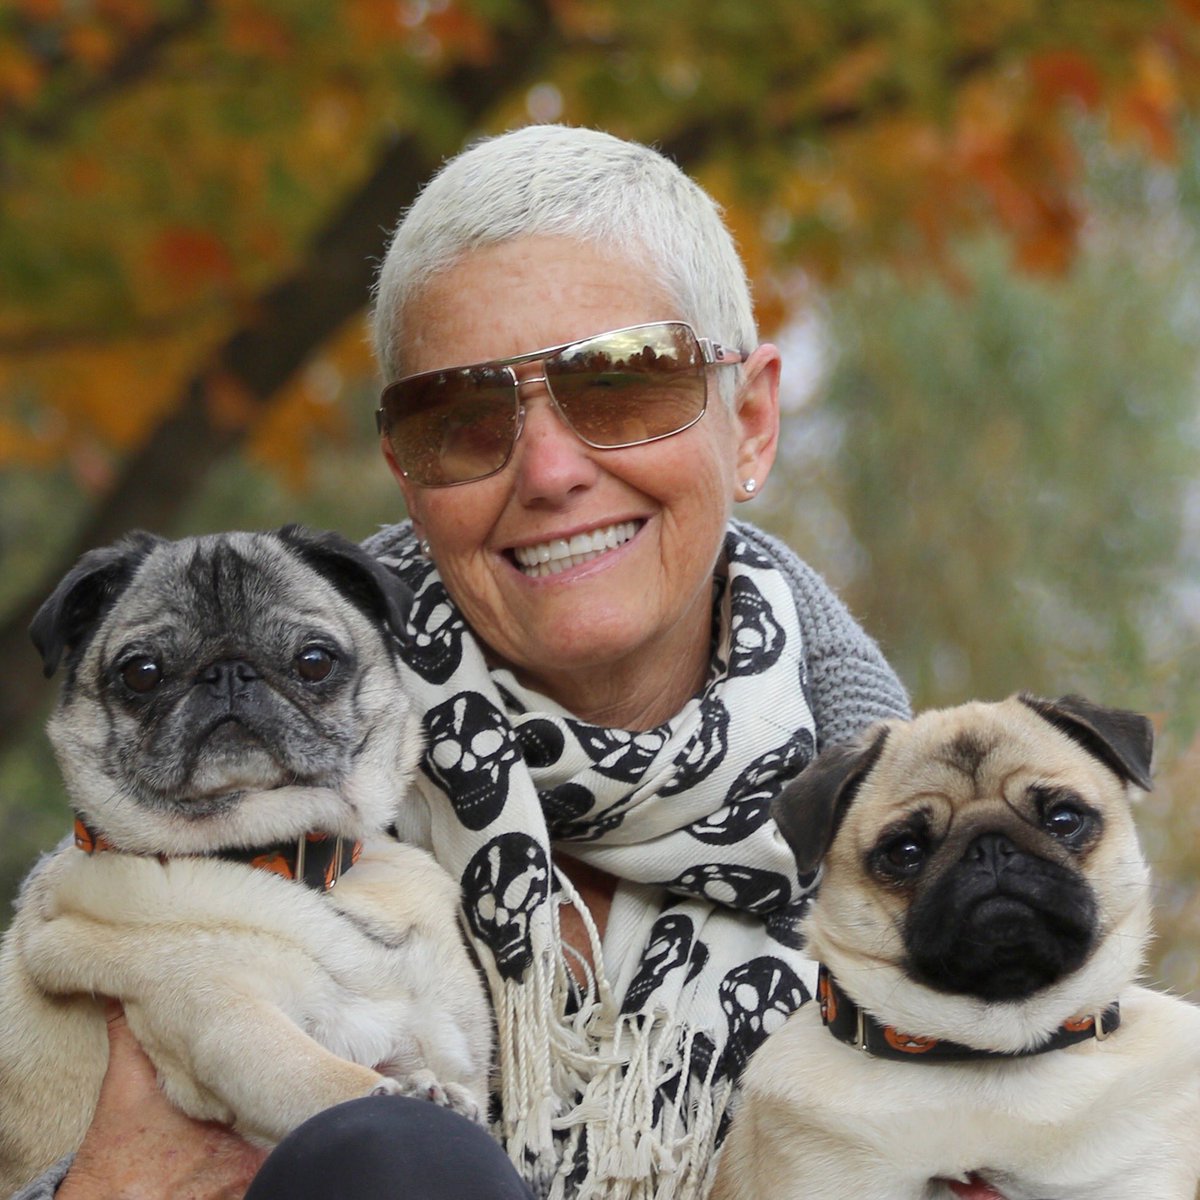 Great family day! ...Dad was behind the camera ❤️

#pug #family #outdoorliving #autumn #londonontario #ldnont #gibbonspark